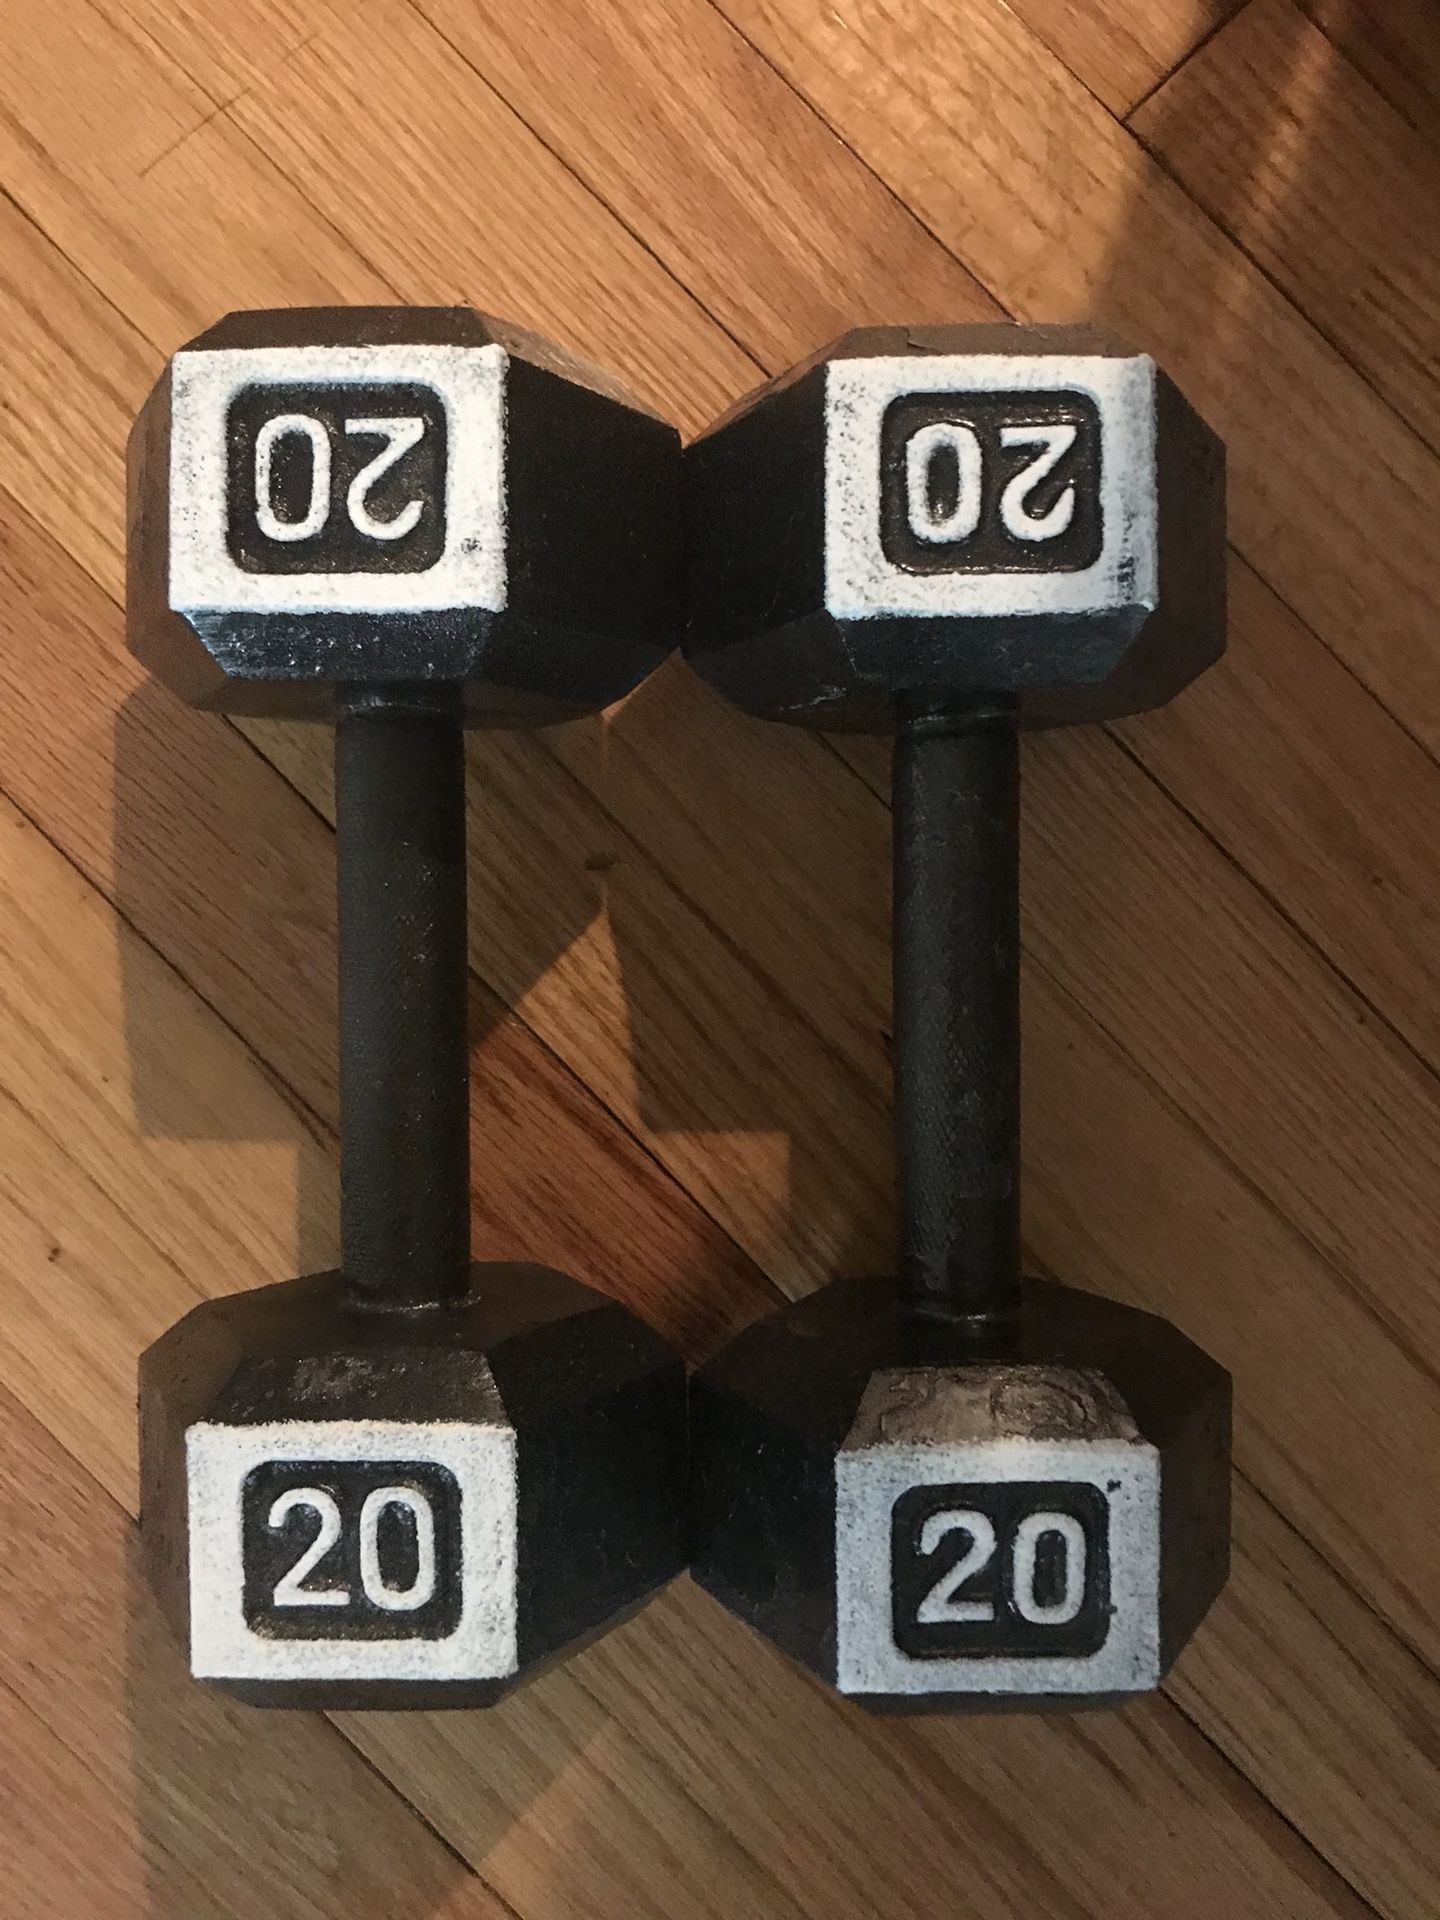 Hex Dumbbells (2x20s) for $30 Firm!!!